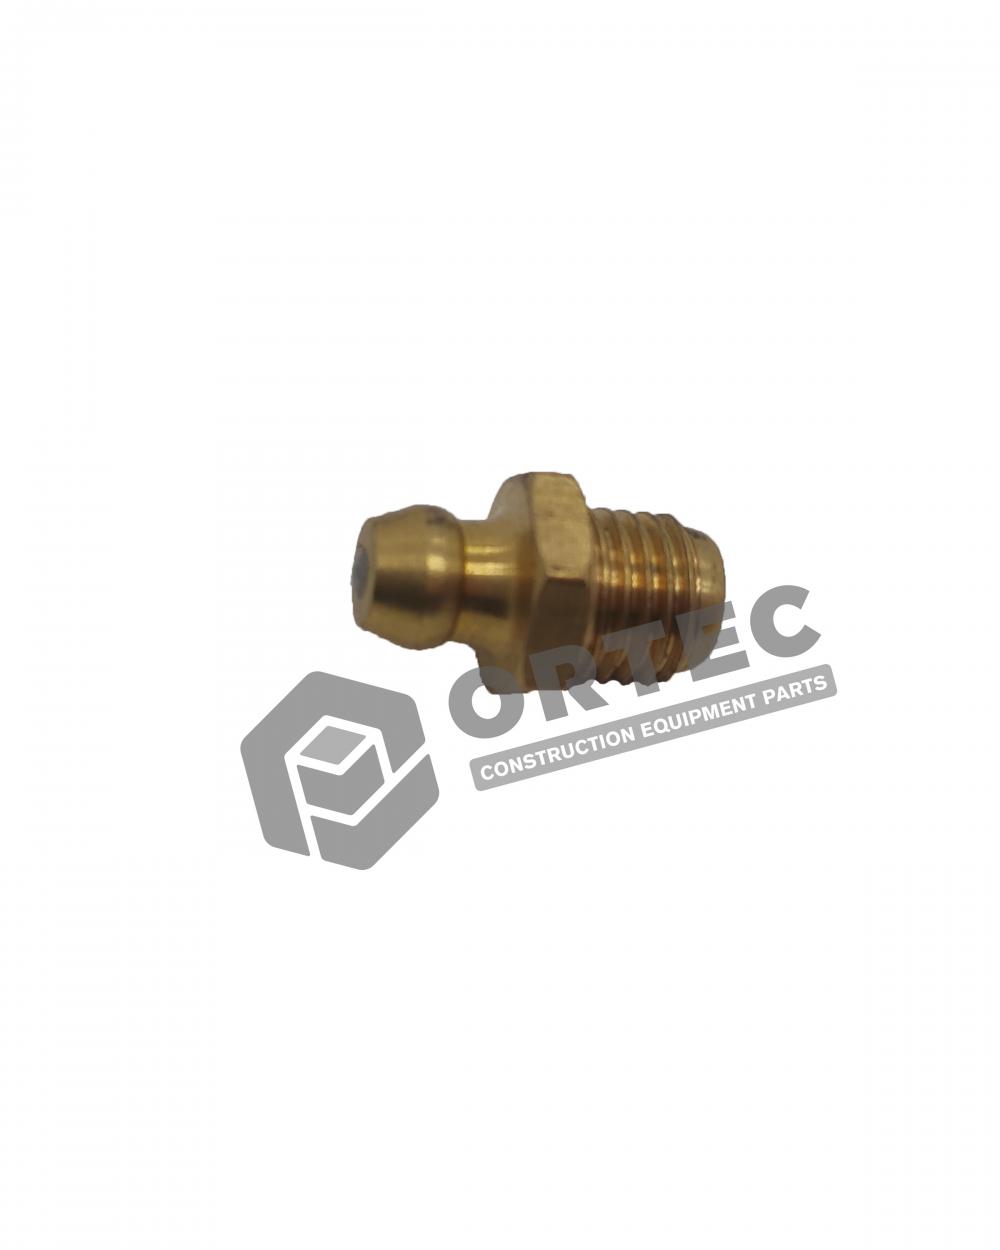 4110001174139 Grease Nozzle Suitable for LGMG MT95H